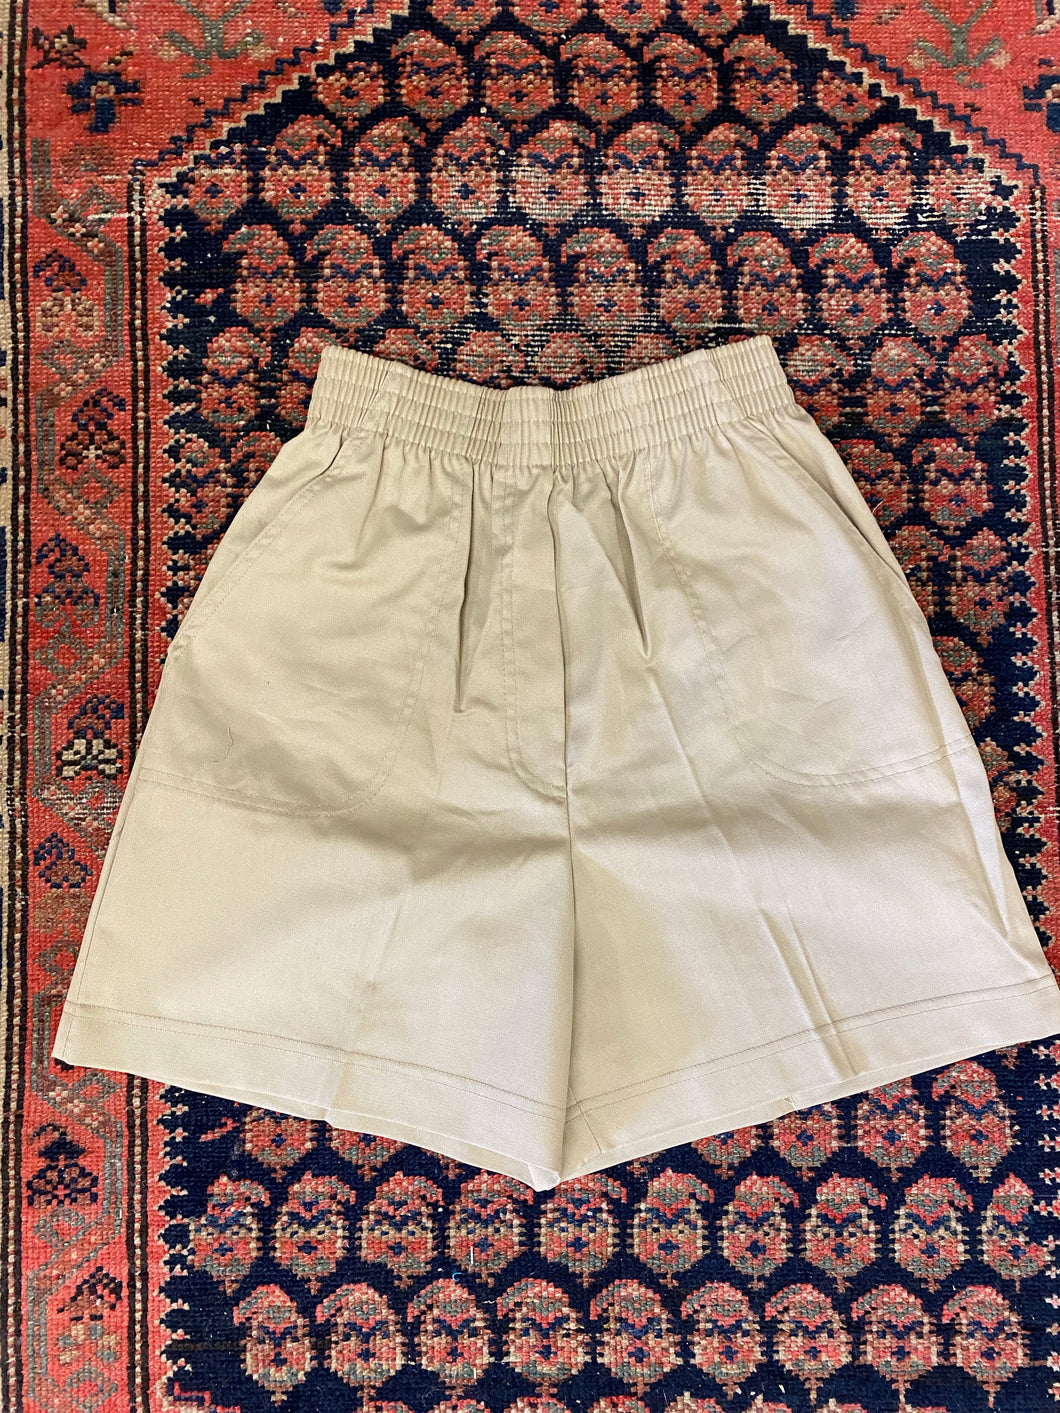 Vintage Cotton Shorts - 24in